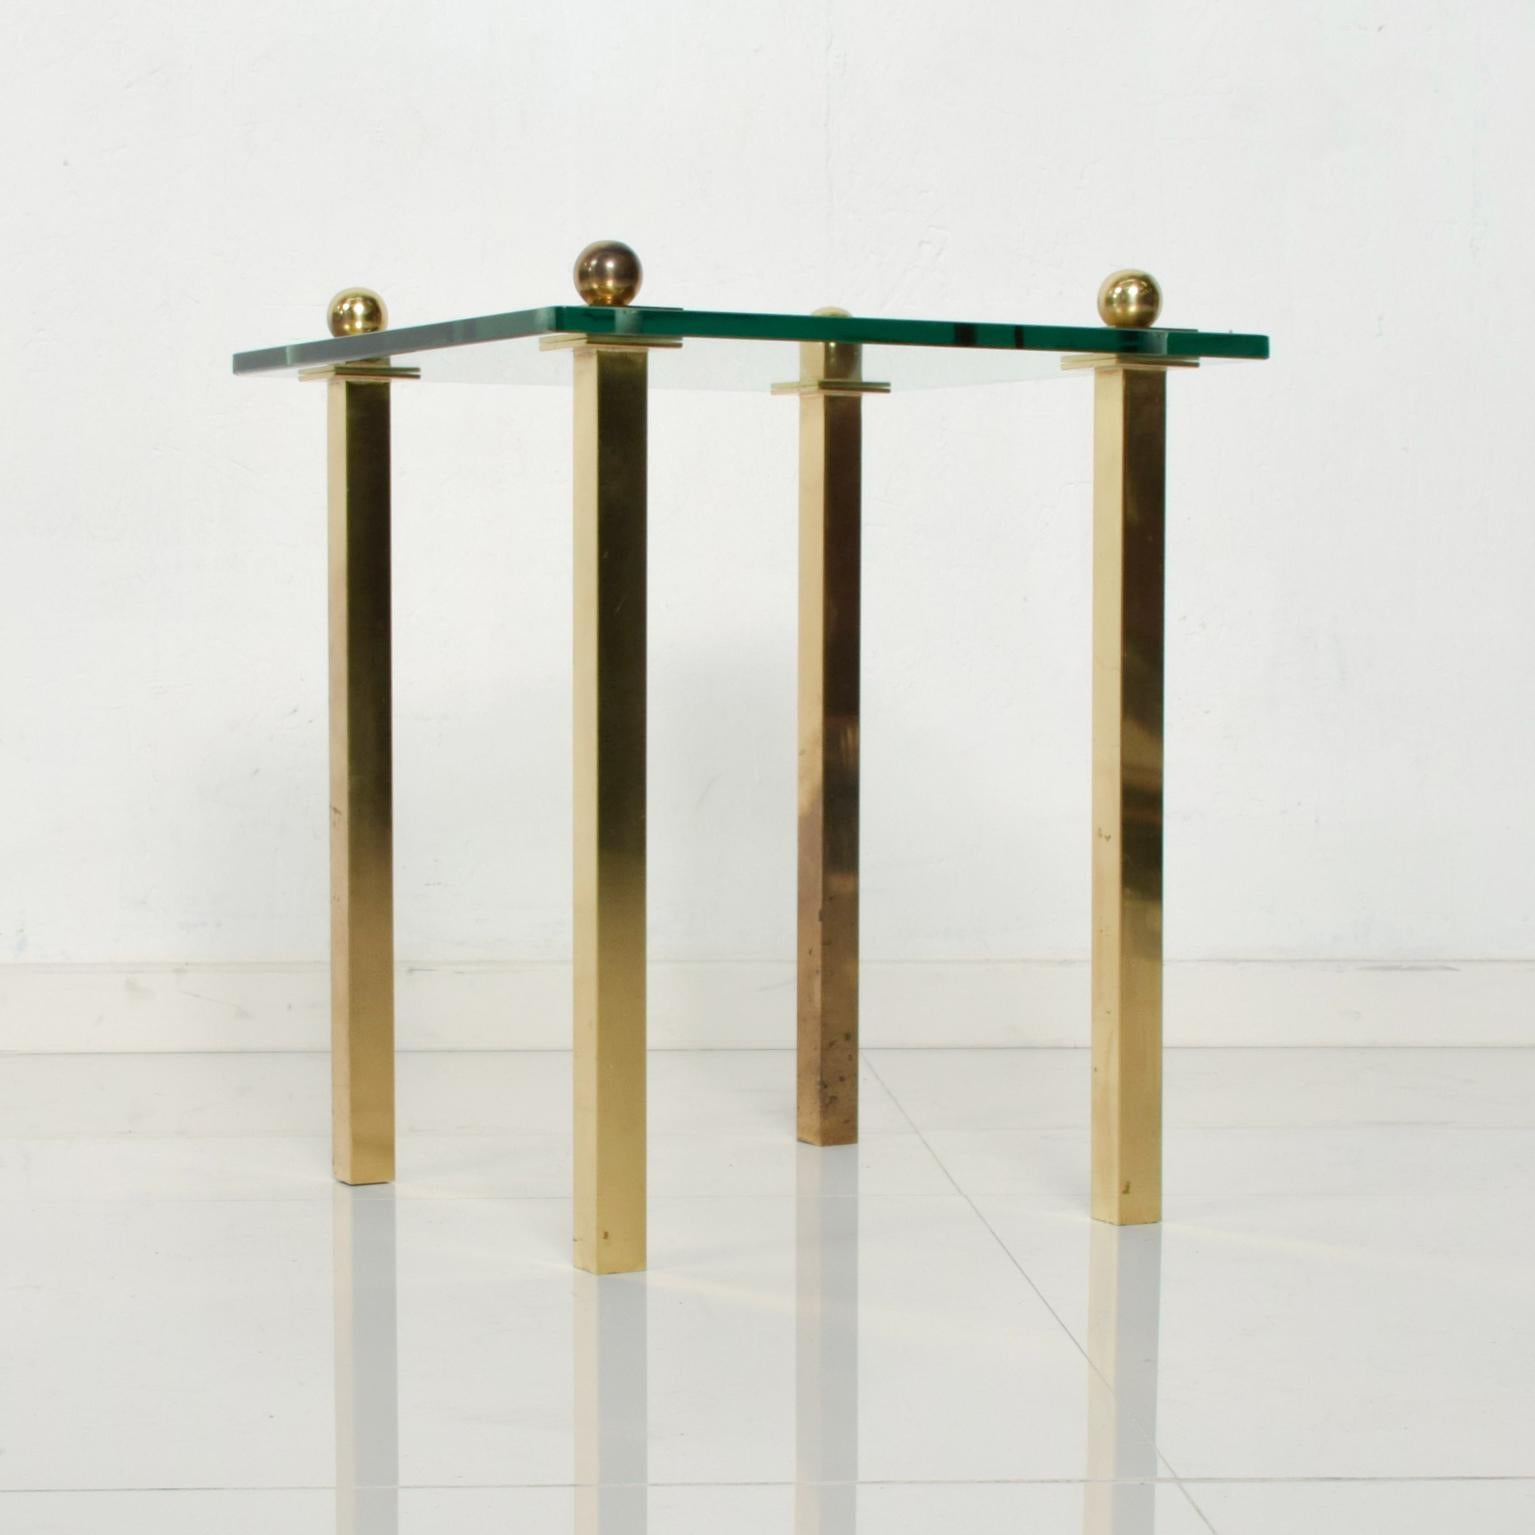 AMBIANIC presents
Brass and Glass Side Tables Vintage Modern elegance
Dimensions: 18.5 Tall (top. of brass finial) x 15 x 15 17 H to top of glass
Original Unrestored Vintage Condition.
Please refer to the images.
No maker label is present.